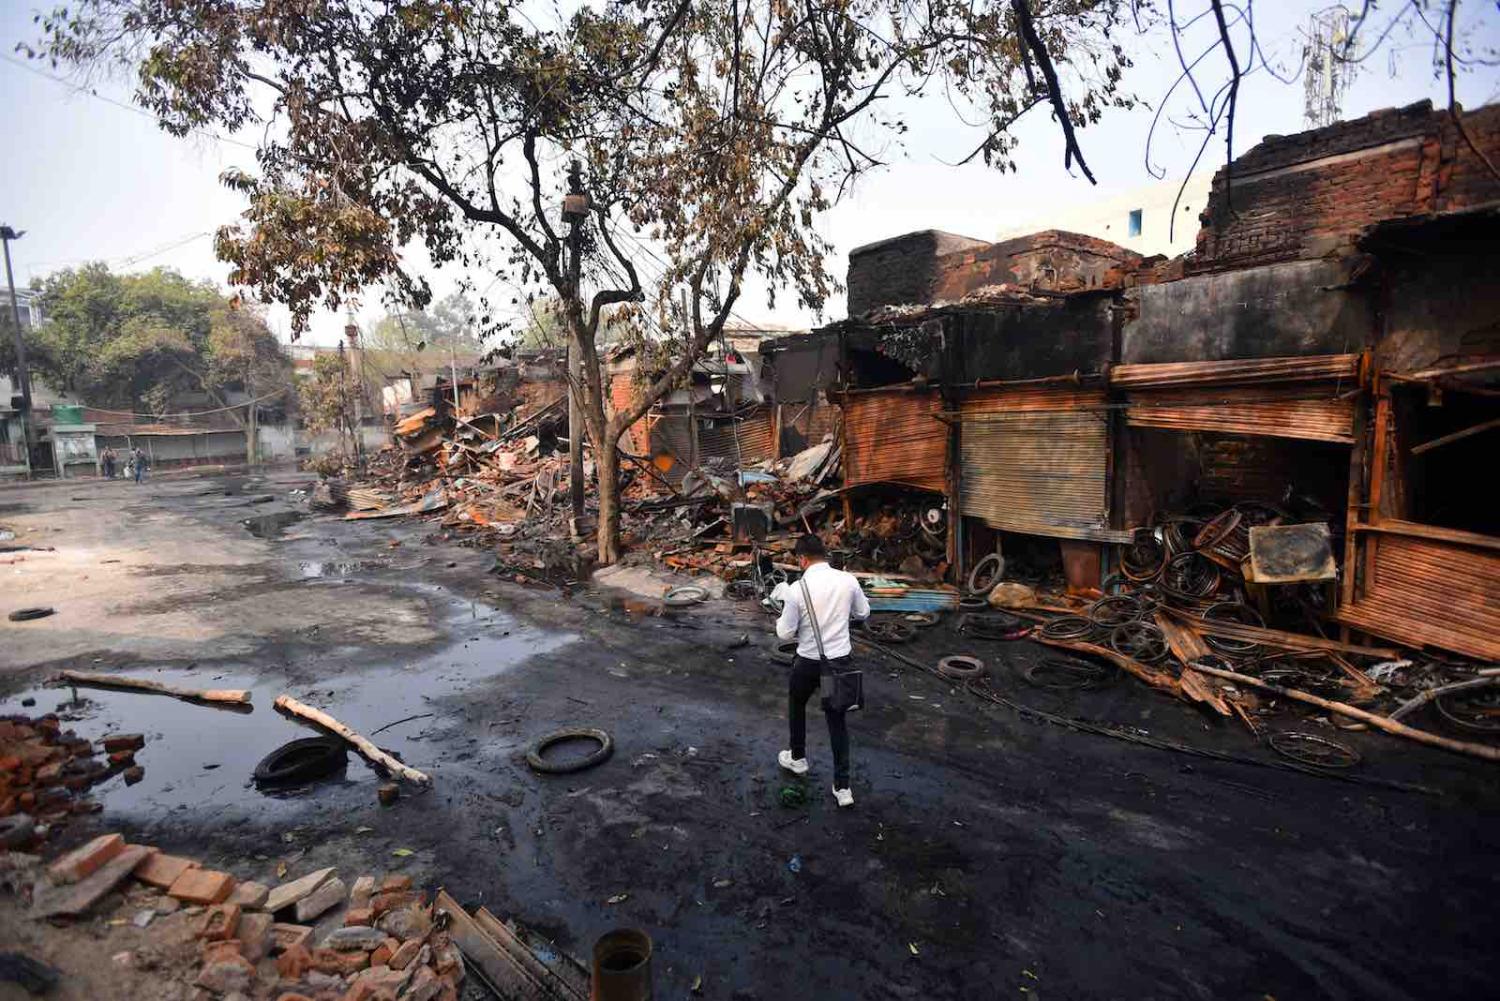 A man walks past shops burnt during sectarian riots in New Delhi, 26 February (Amal KS/Hindustan Times via Getty Images)